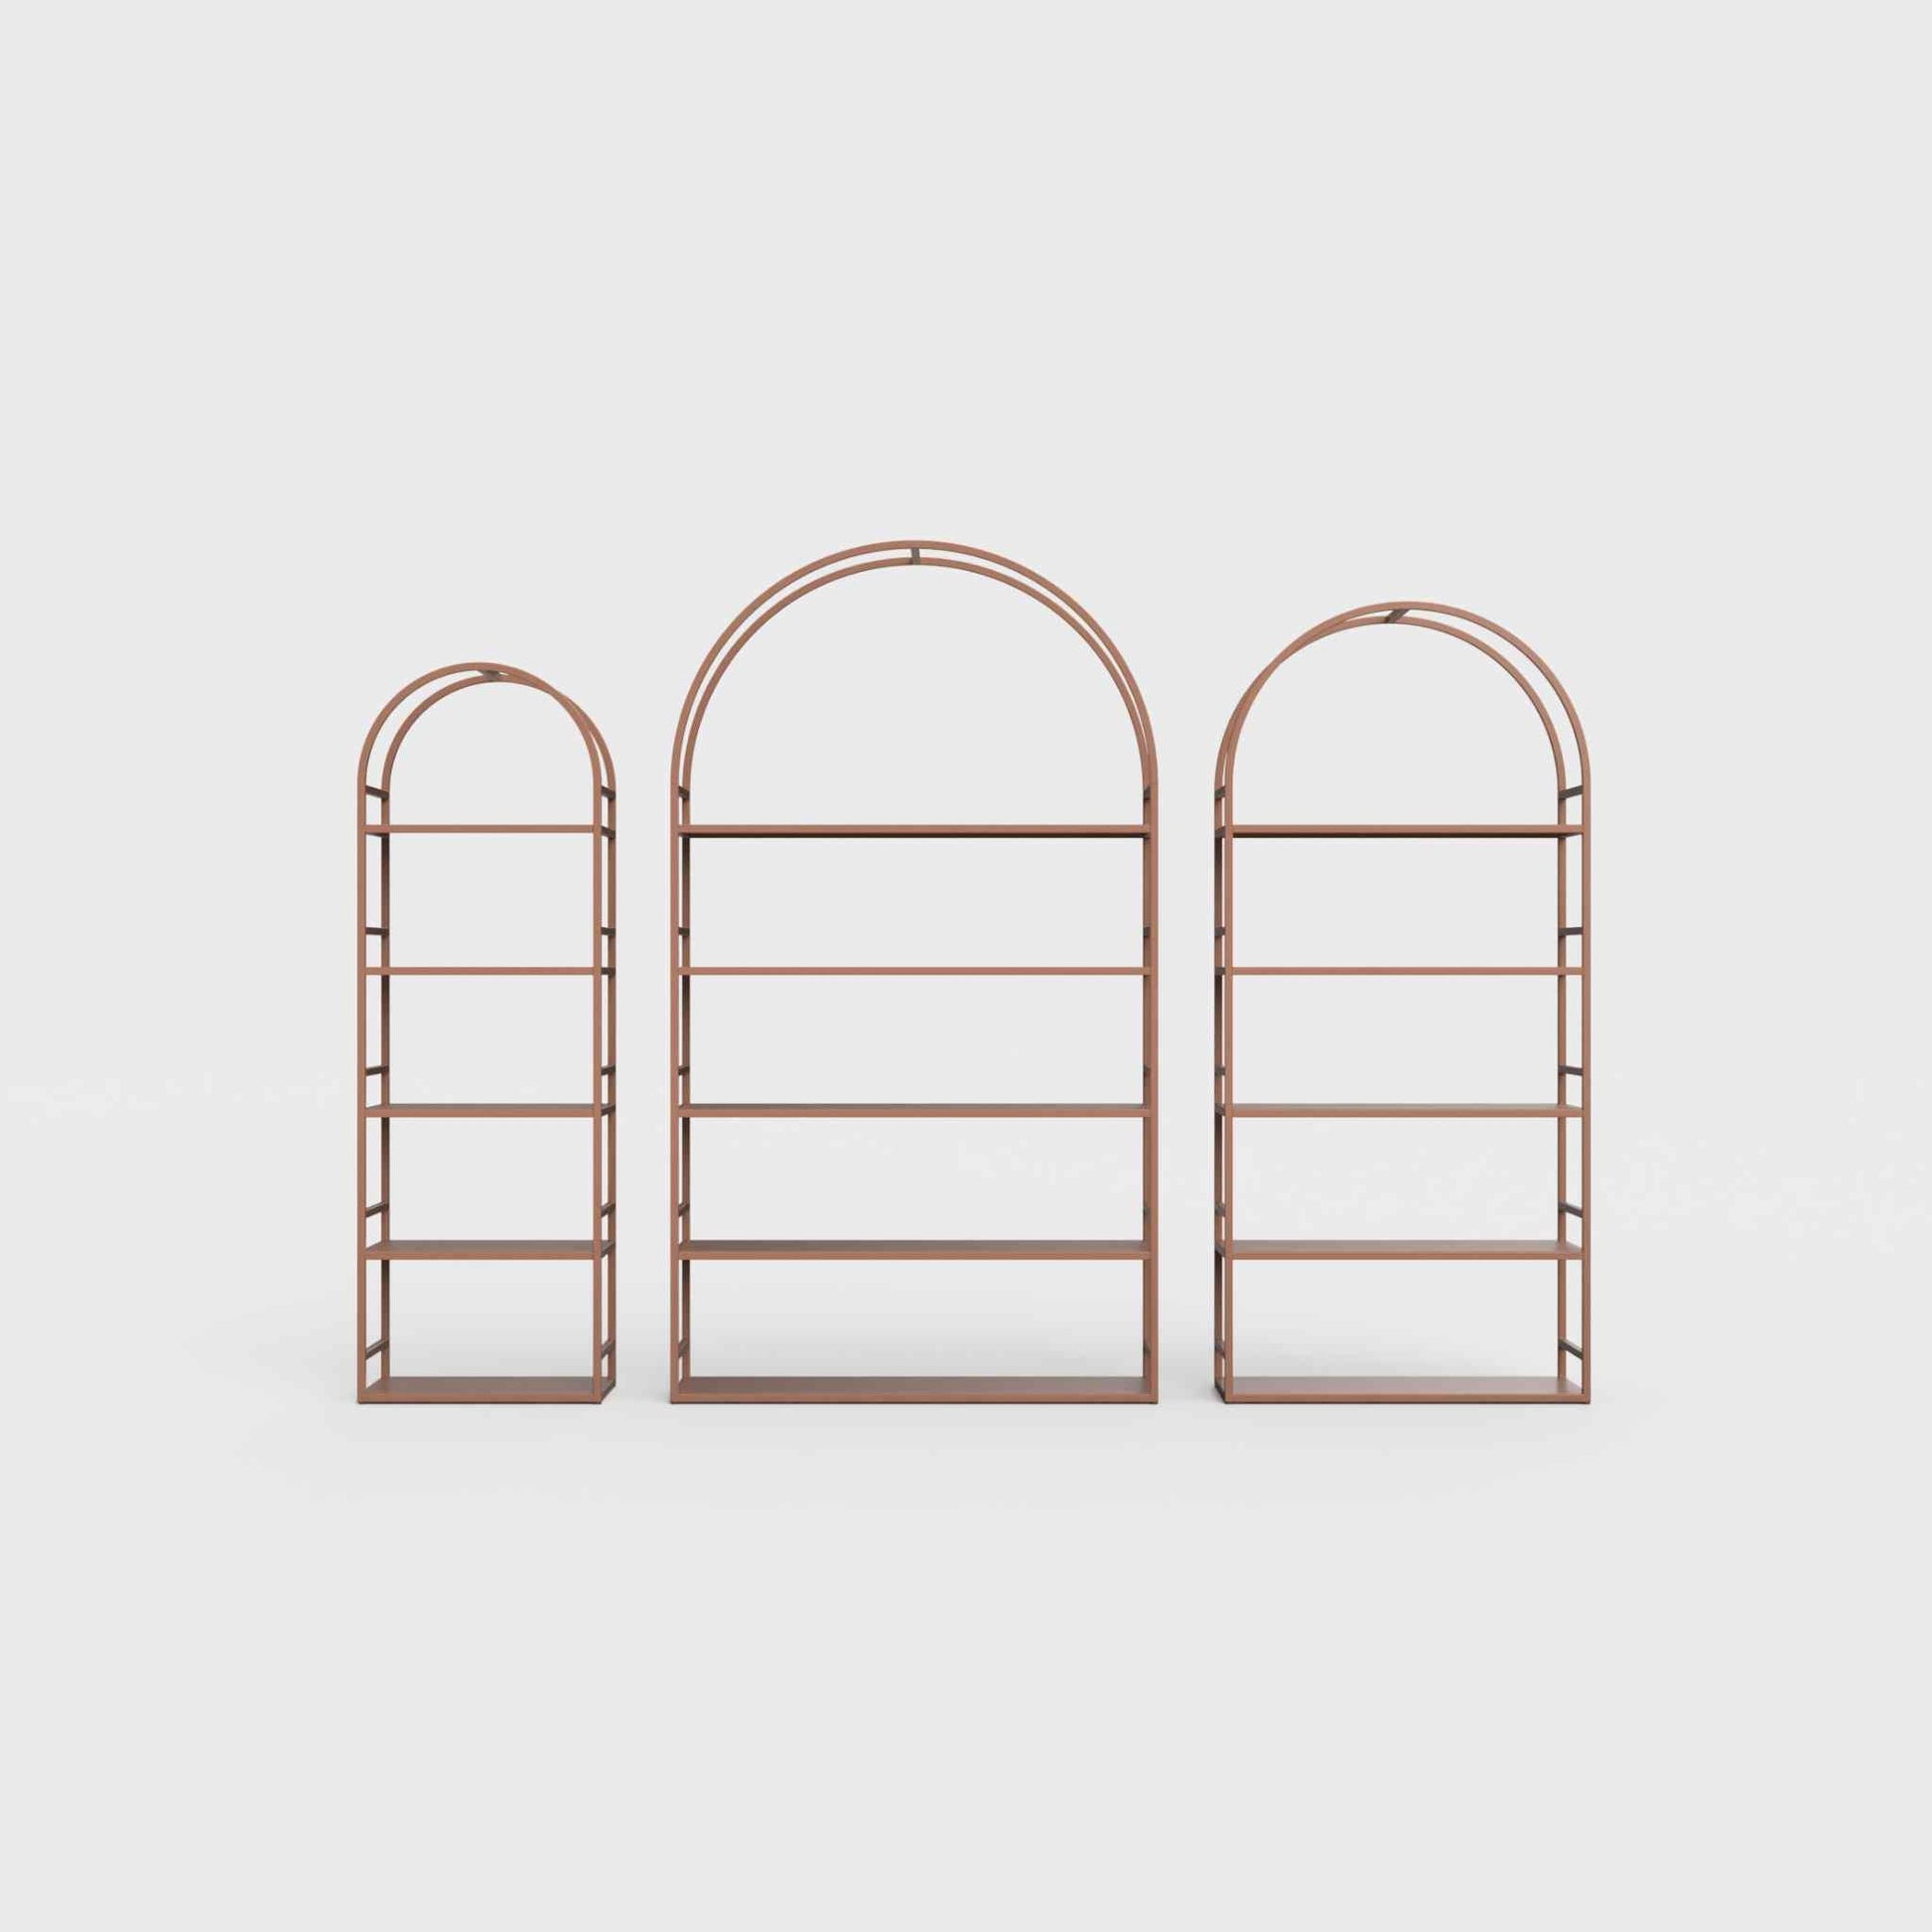 Arched bookcase Arkada, available in Switzerland through ÉTAUDORÉ, made from highest quality powdered coated steel in terracotta brown-orange color